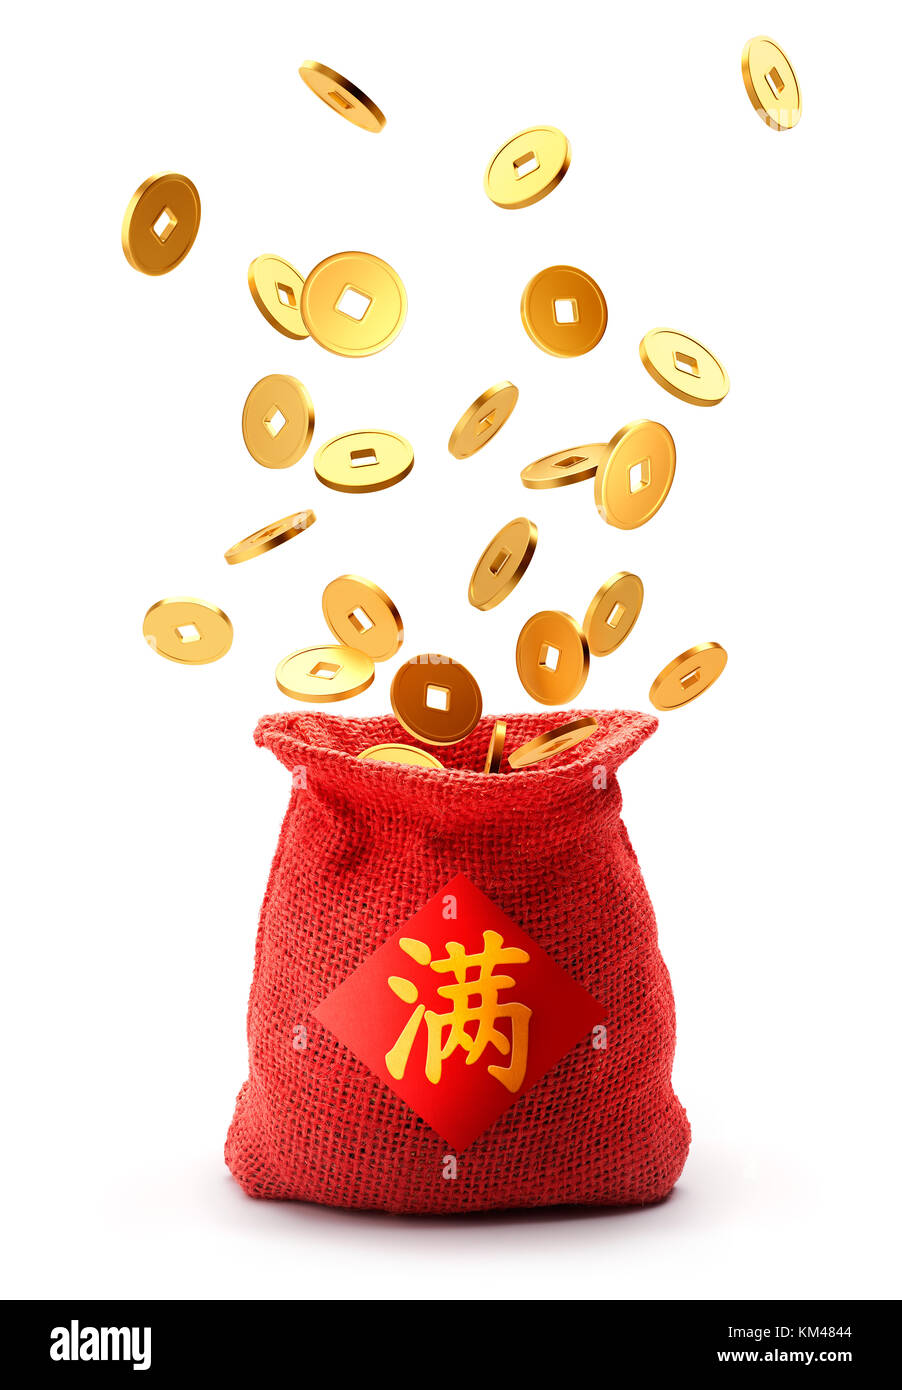 Burlap sack full with chinese gold coins isolated on white background, Chinese calligraphy means full Stock Photo